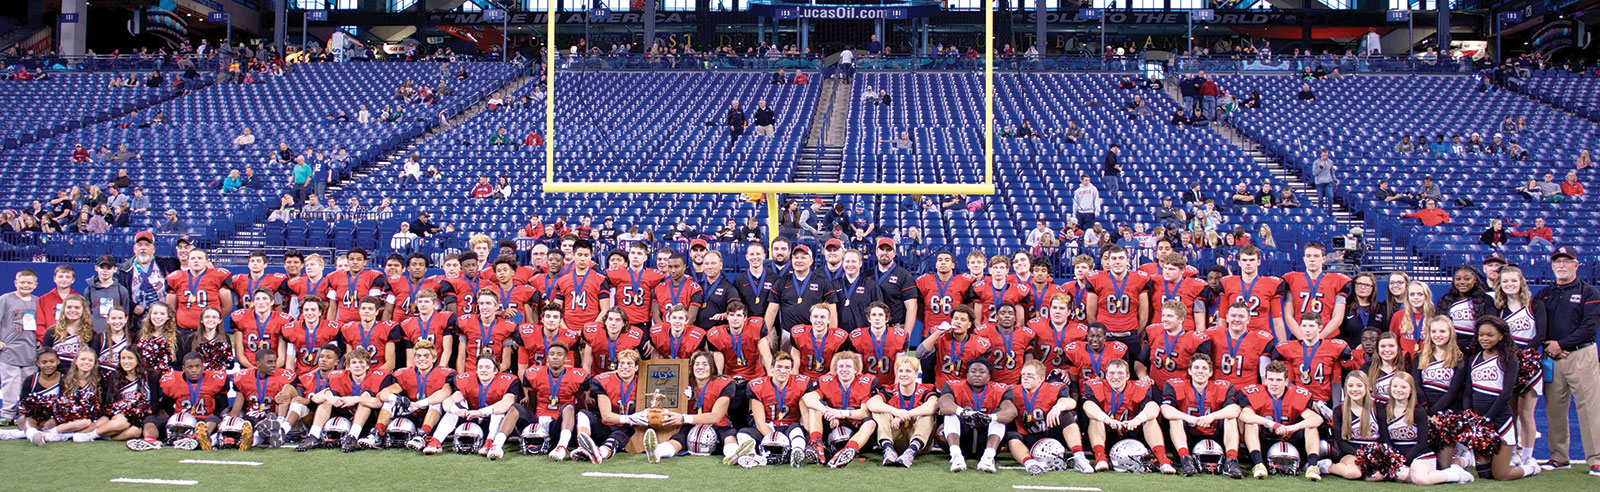 Despite early adversity, Ritter captures state football title (December